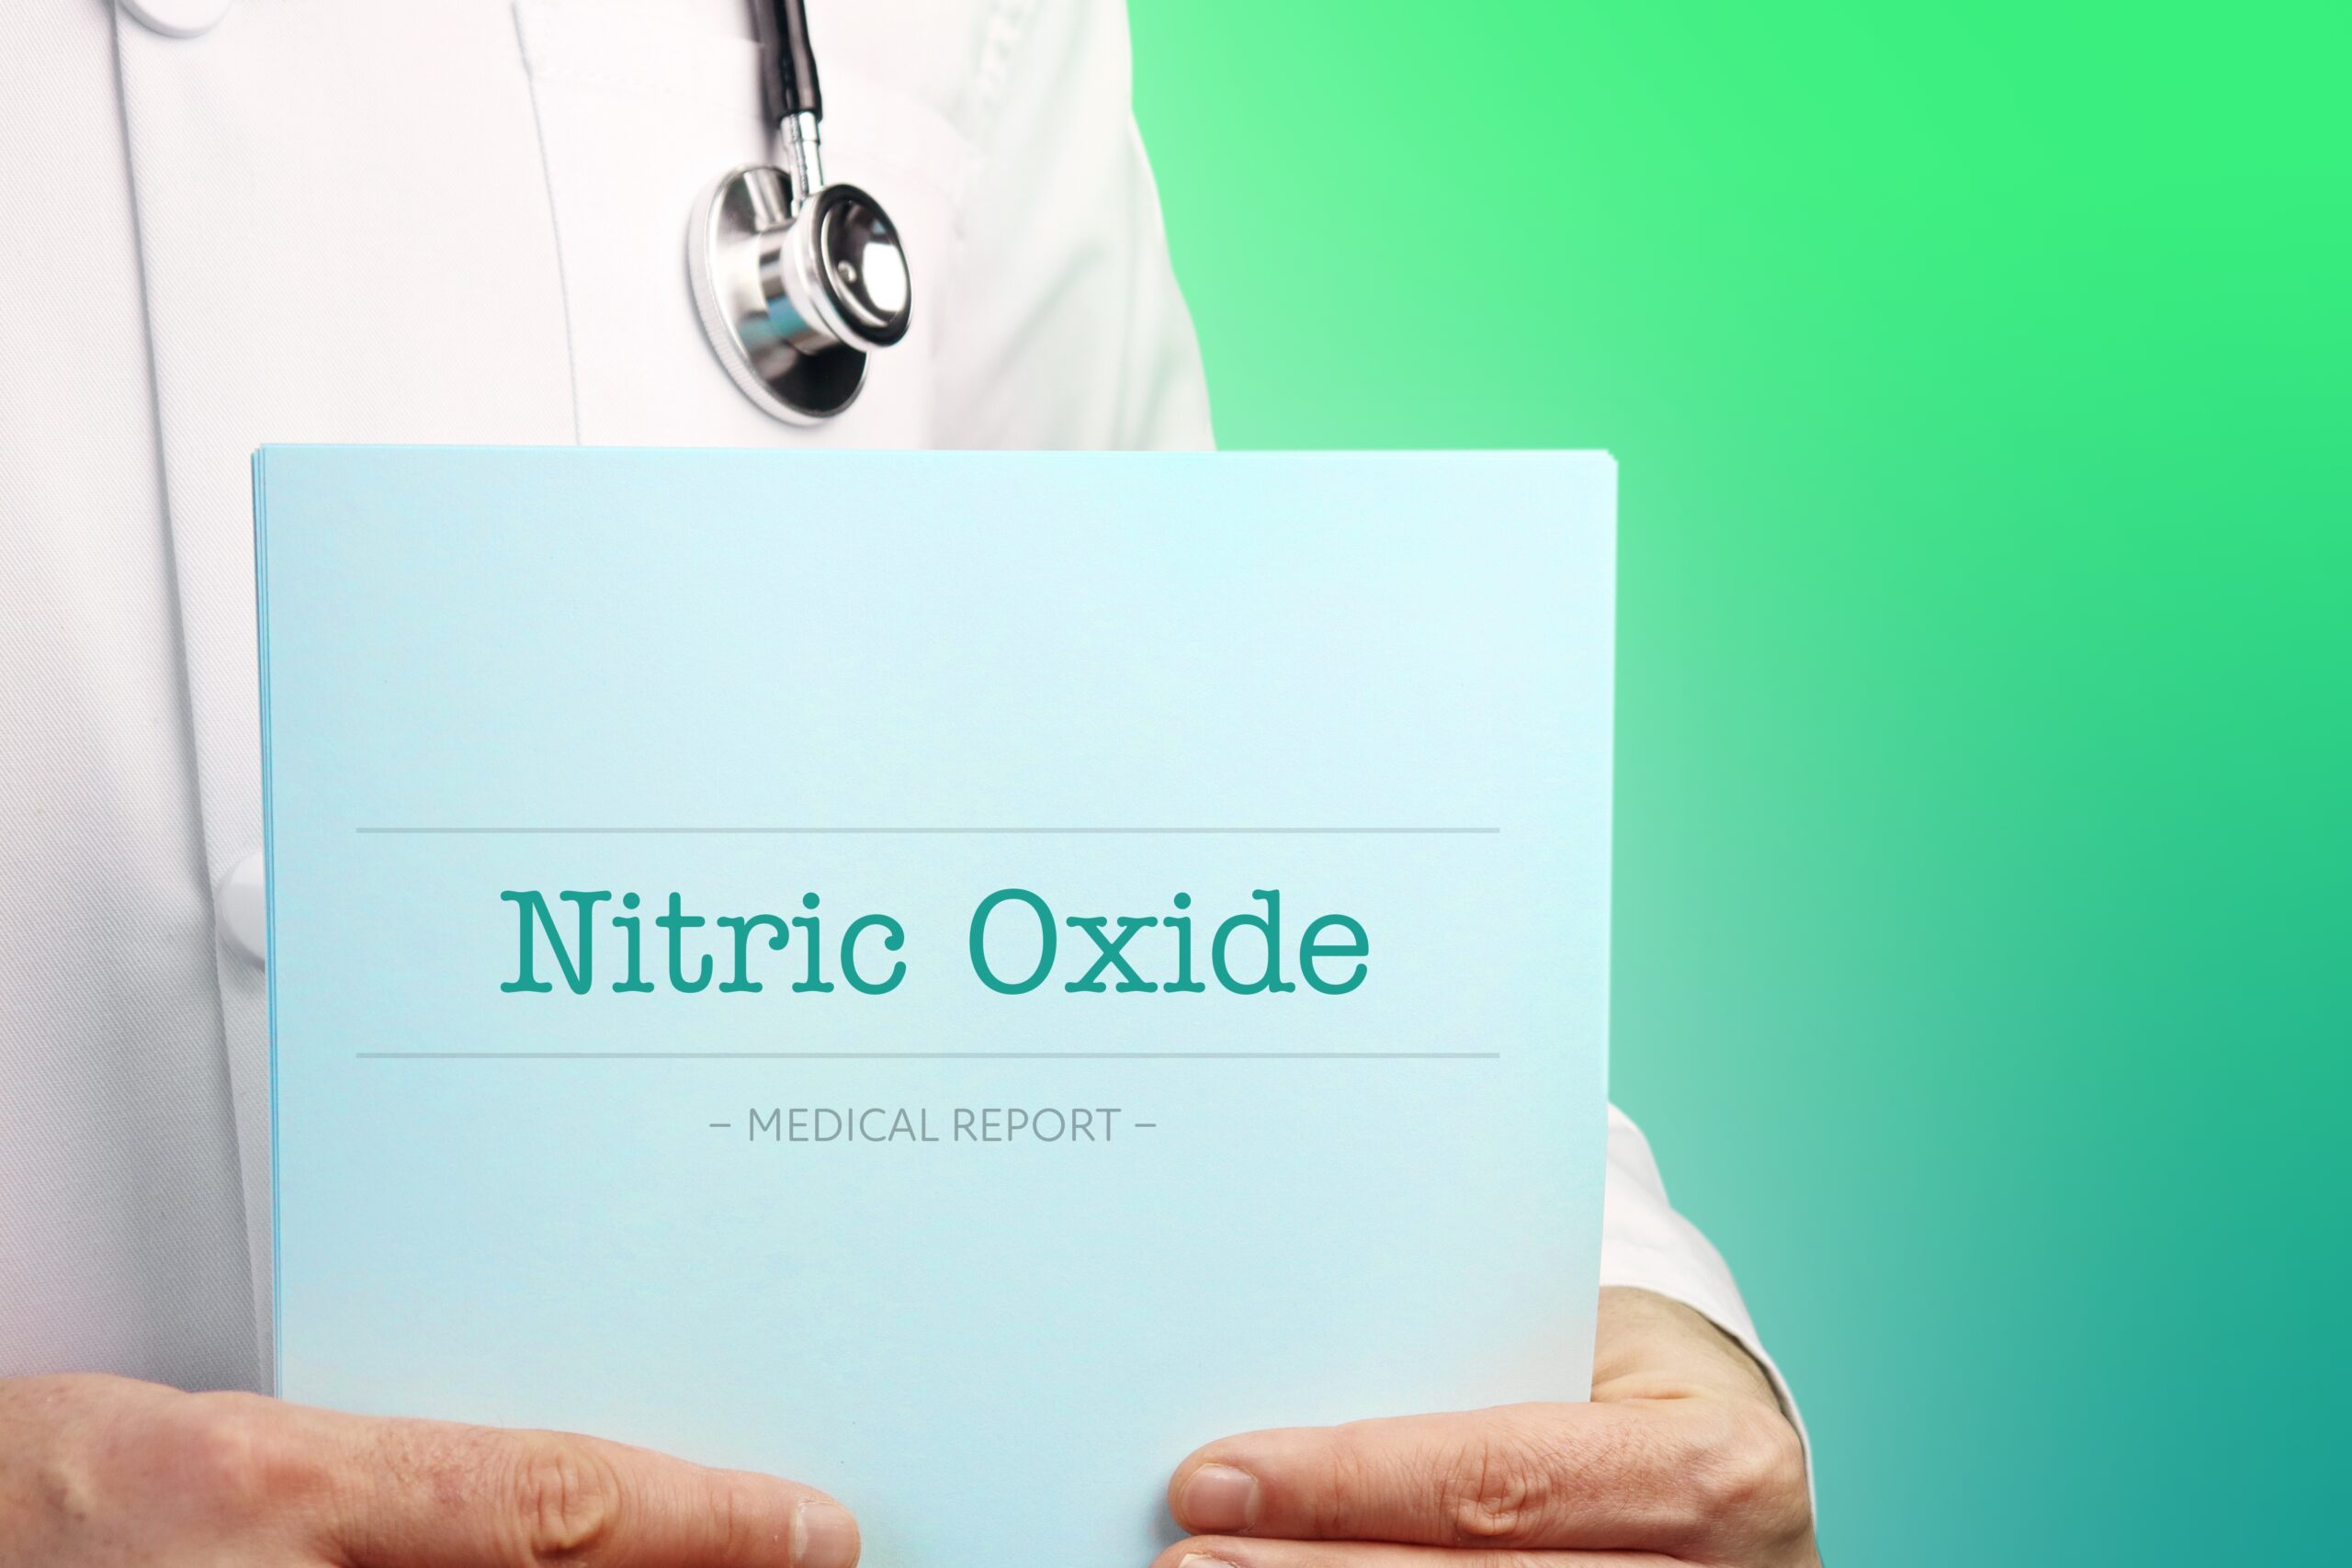 Nitric Oxide. Doctor (male) with stethoscope holds medical report in his hands. Cutout. Green turquoise background. Text is on the documents. Healthcare/Medicine